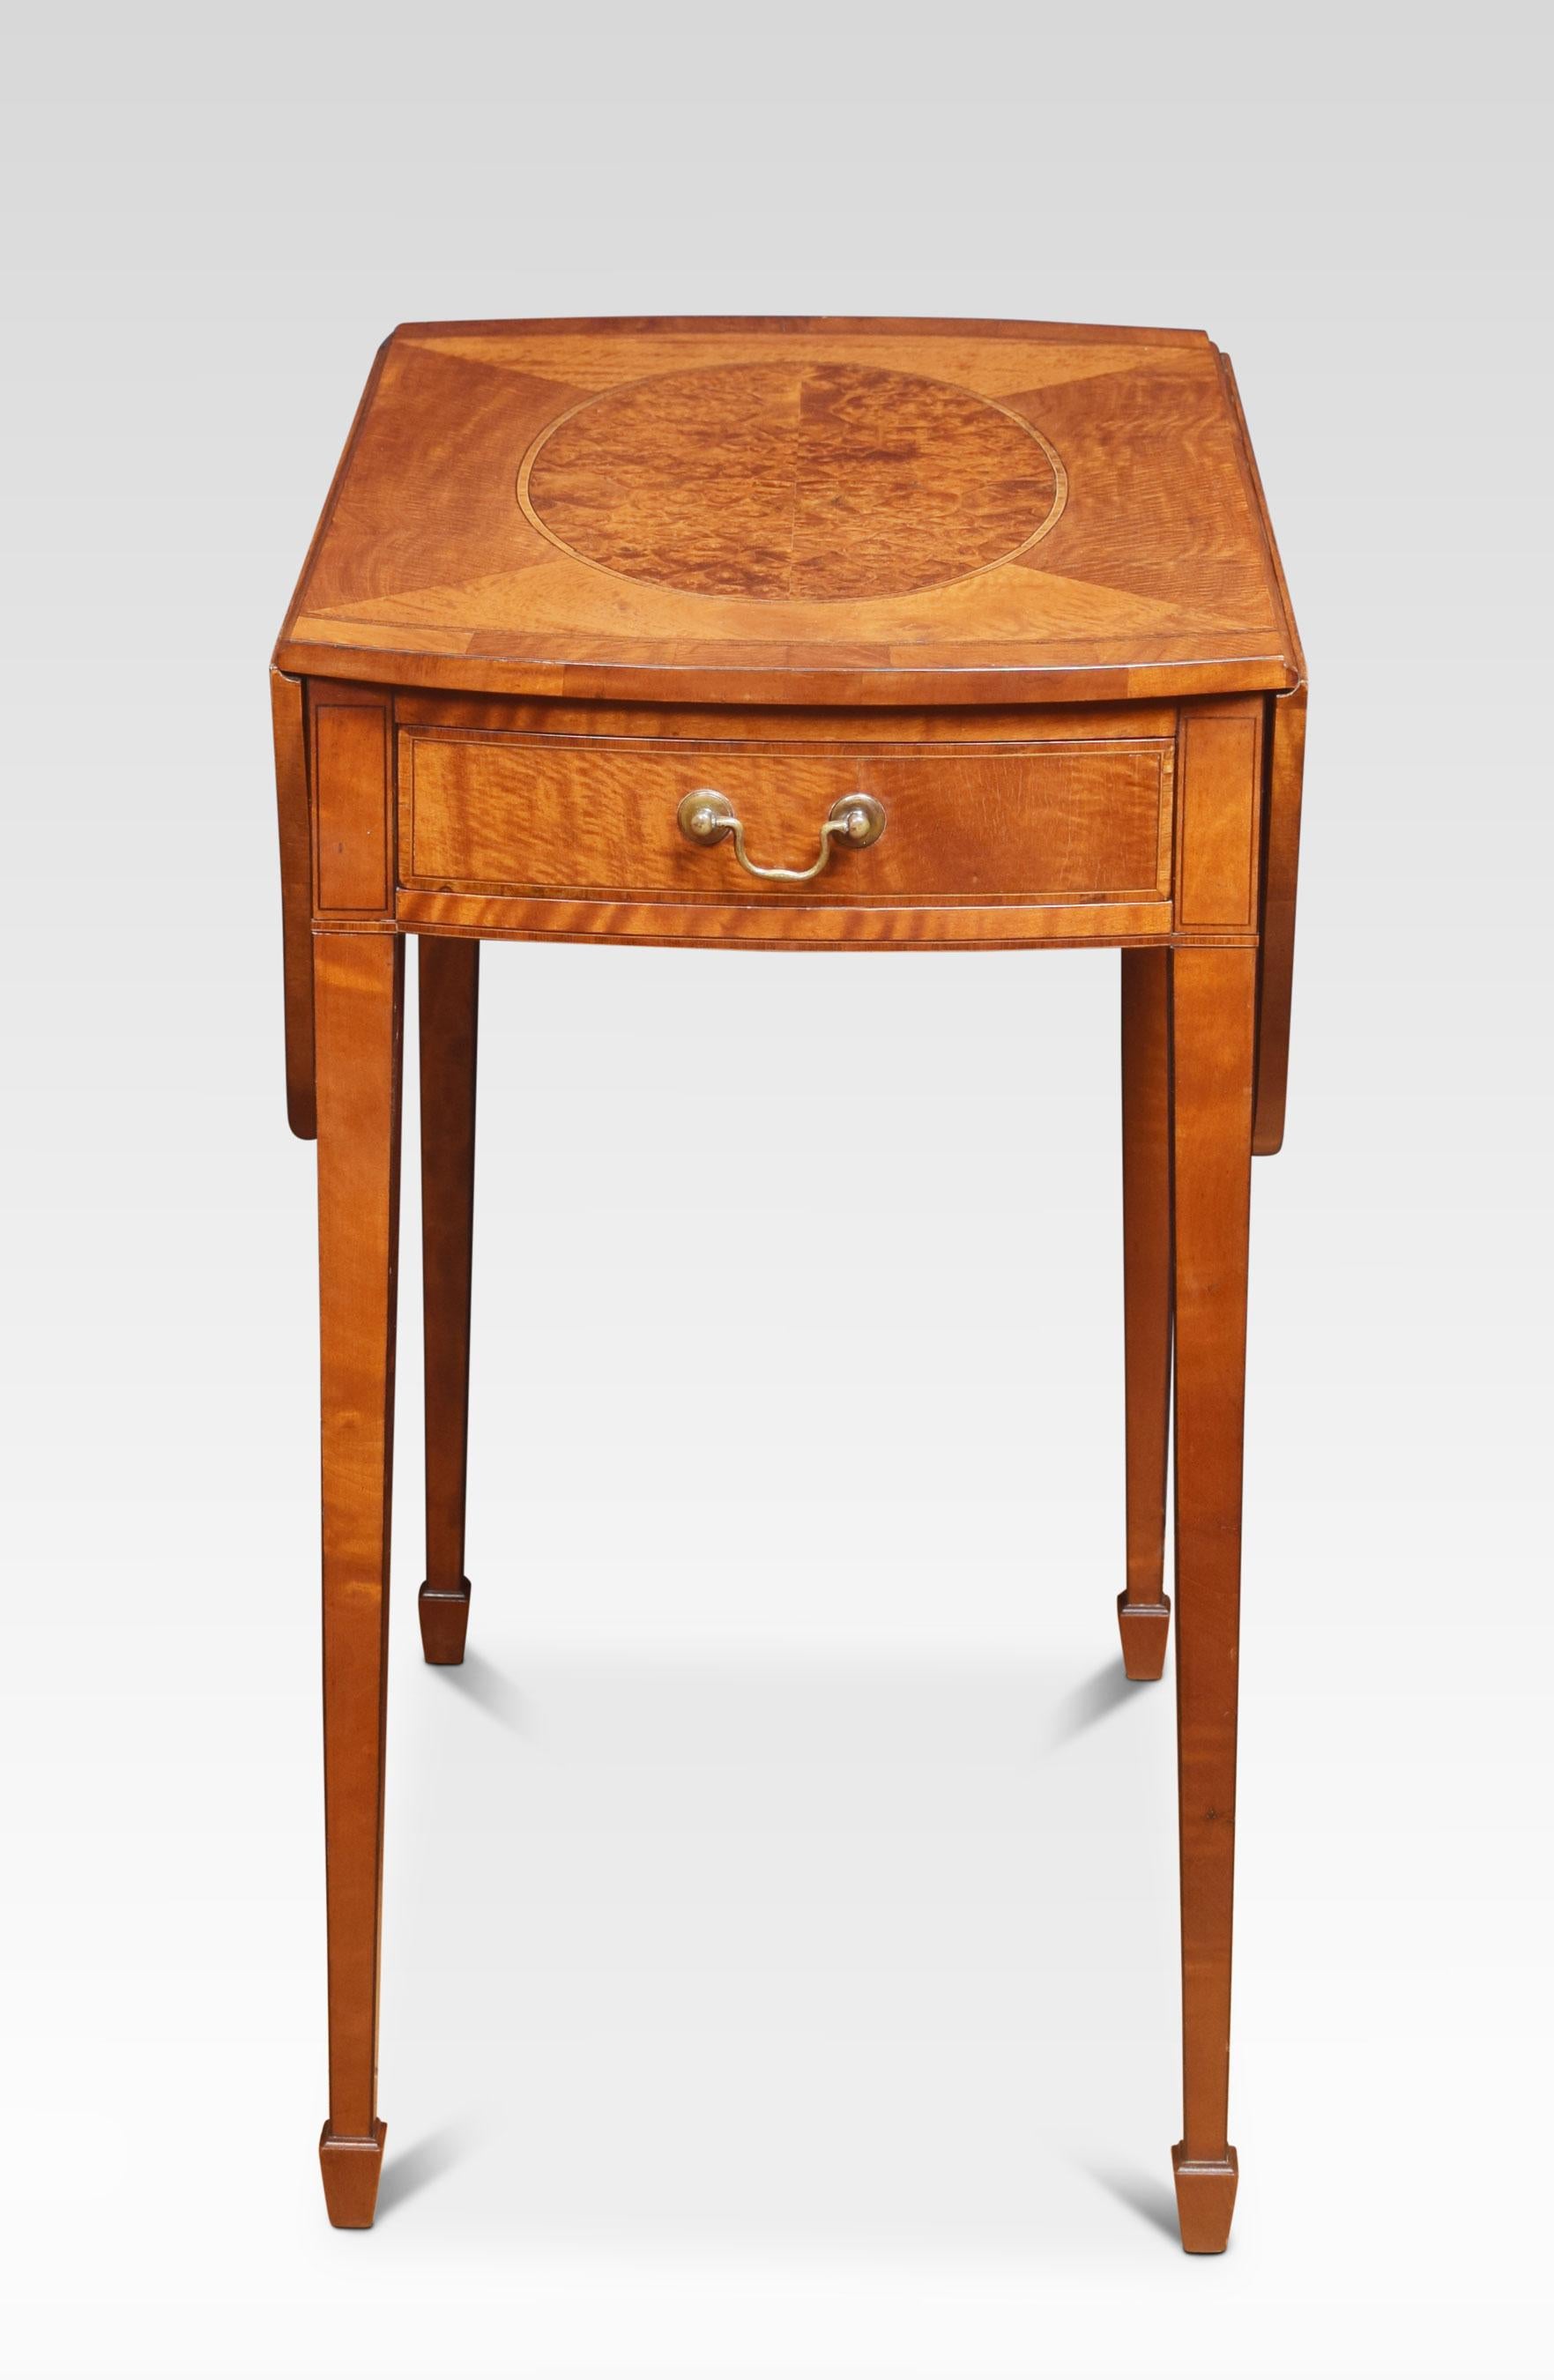 George III style satinwood Pembroke table, the oval top with central amboyna inlay incorporating two hinged flaps, above a drawer, on square section tapering legs, terminating in spade feet.
Dimensions
Height 29.5 inches
Width 17.5 inches when